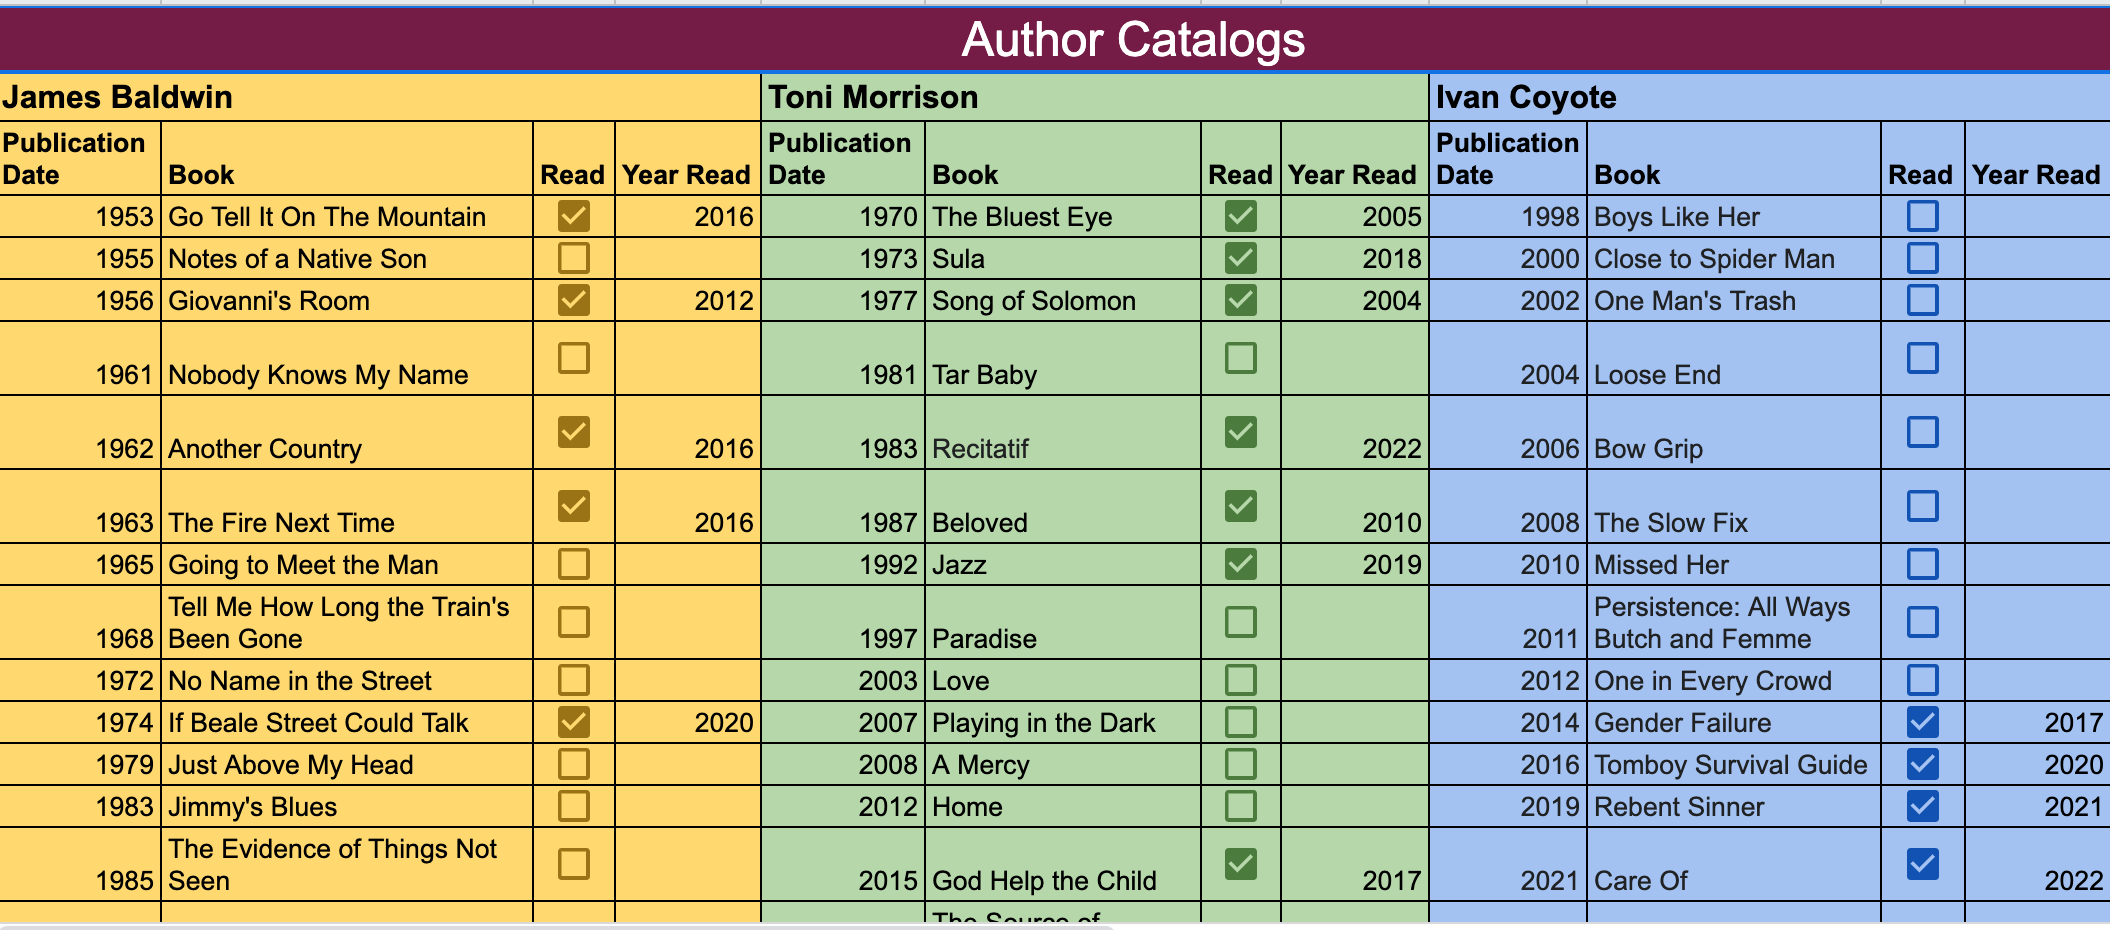 Screenshot of my Author Catalogs tab. There are three colored blocks, each with the name of a different author (James Baldwin, Toni Morrison, Ivan Coyote), with a list of their works, date published, a checkbox for if I've read them, and the year I read them.